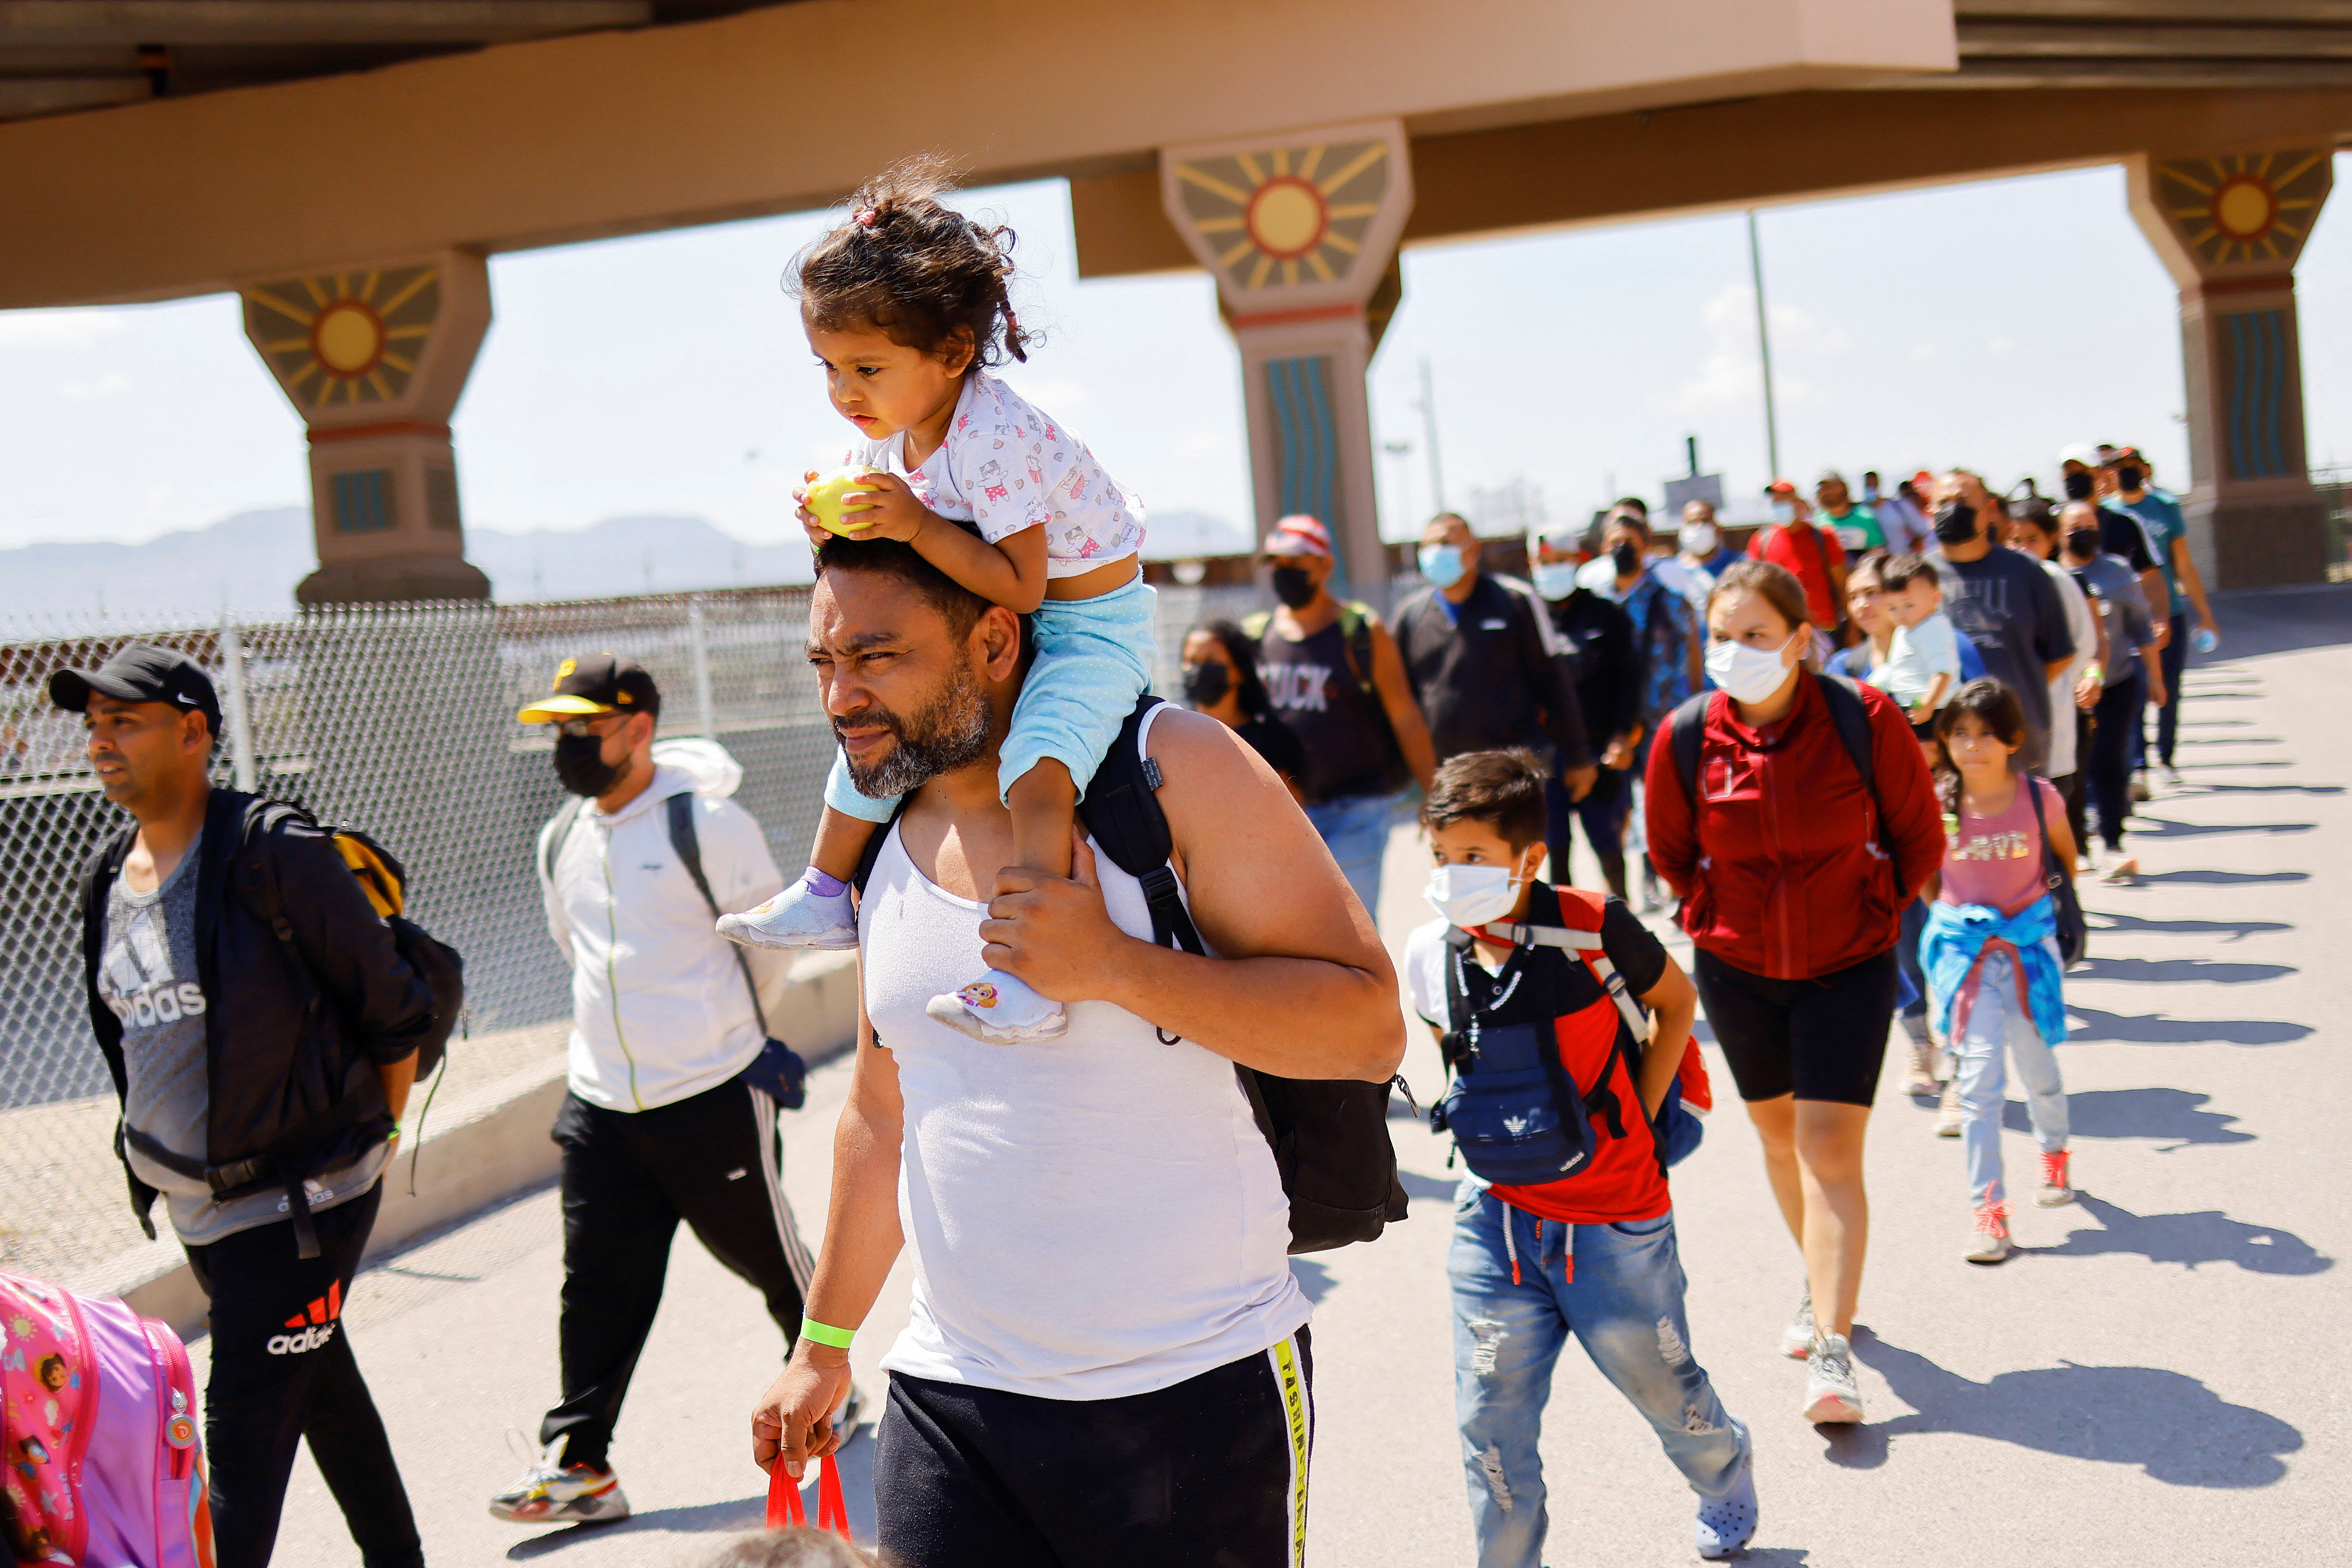 Migrants walk after being detained by U.S. Border Patrol agents after crossing into the United States from Mexico to turn themselves in to request for asylum, in El Paso